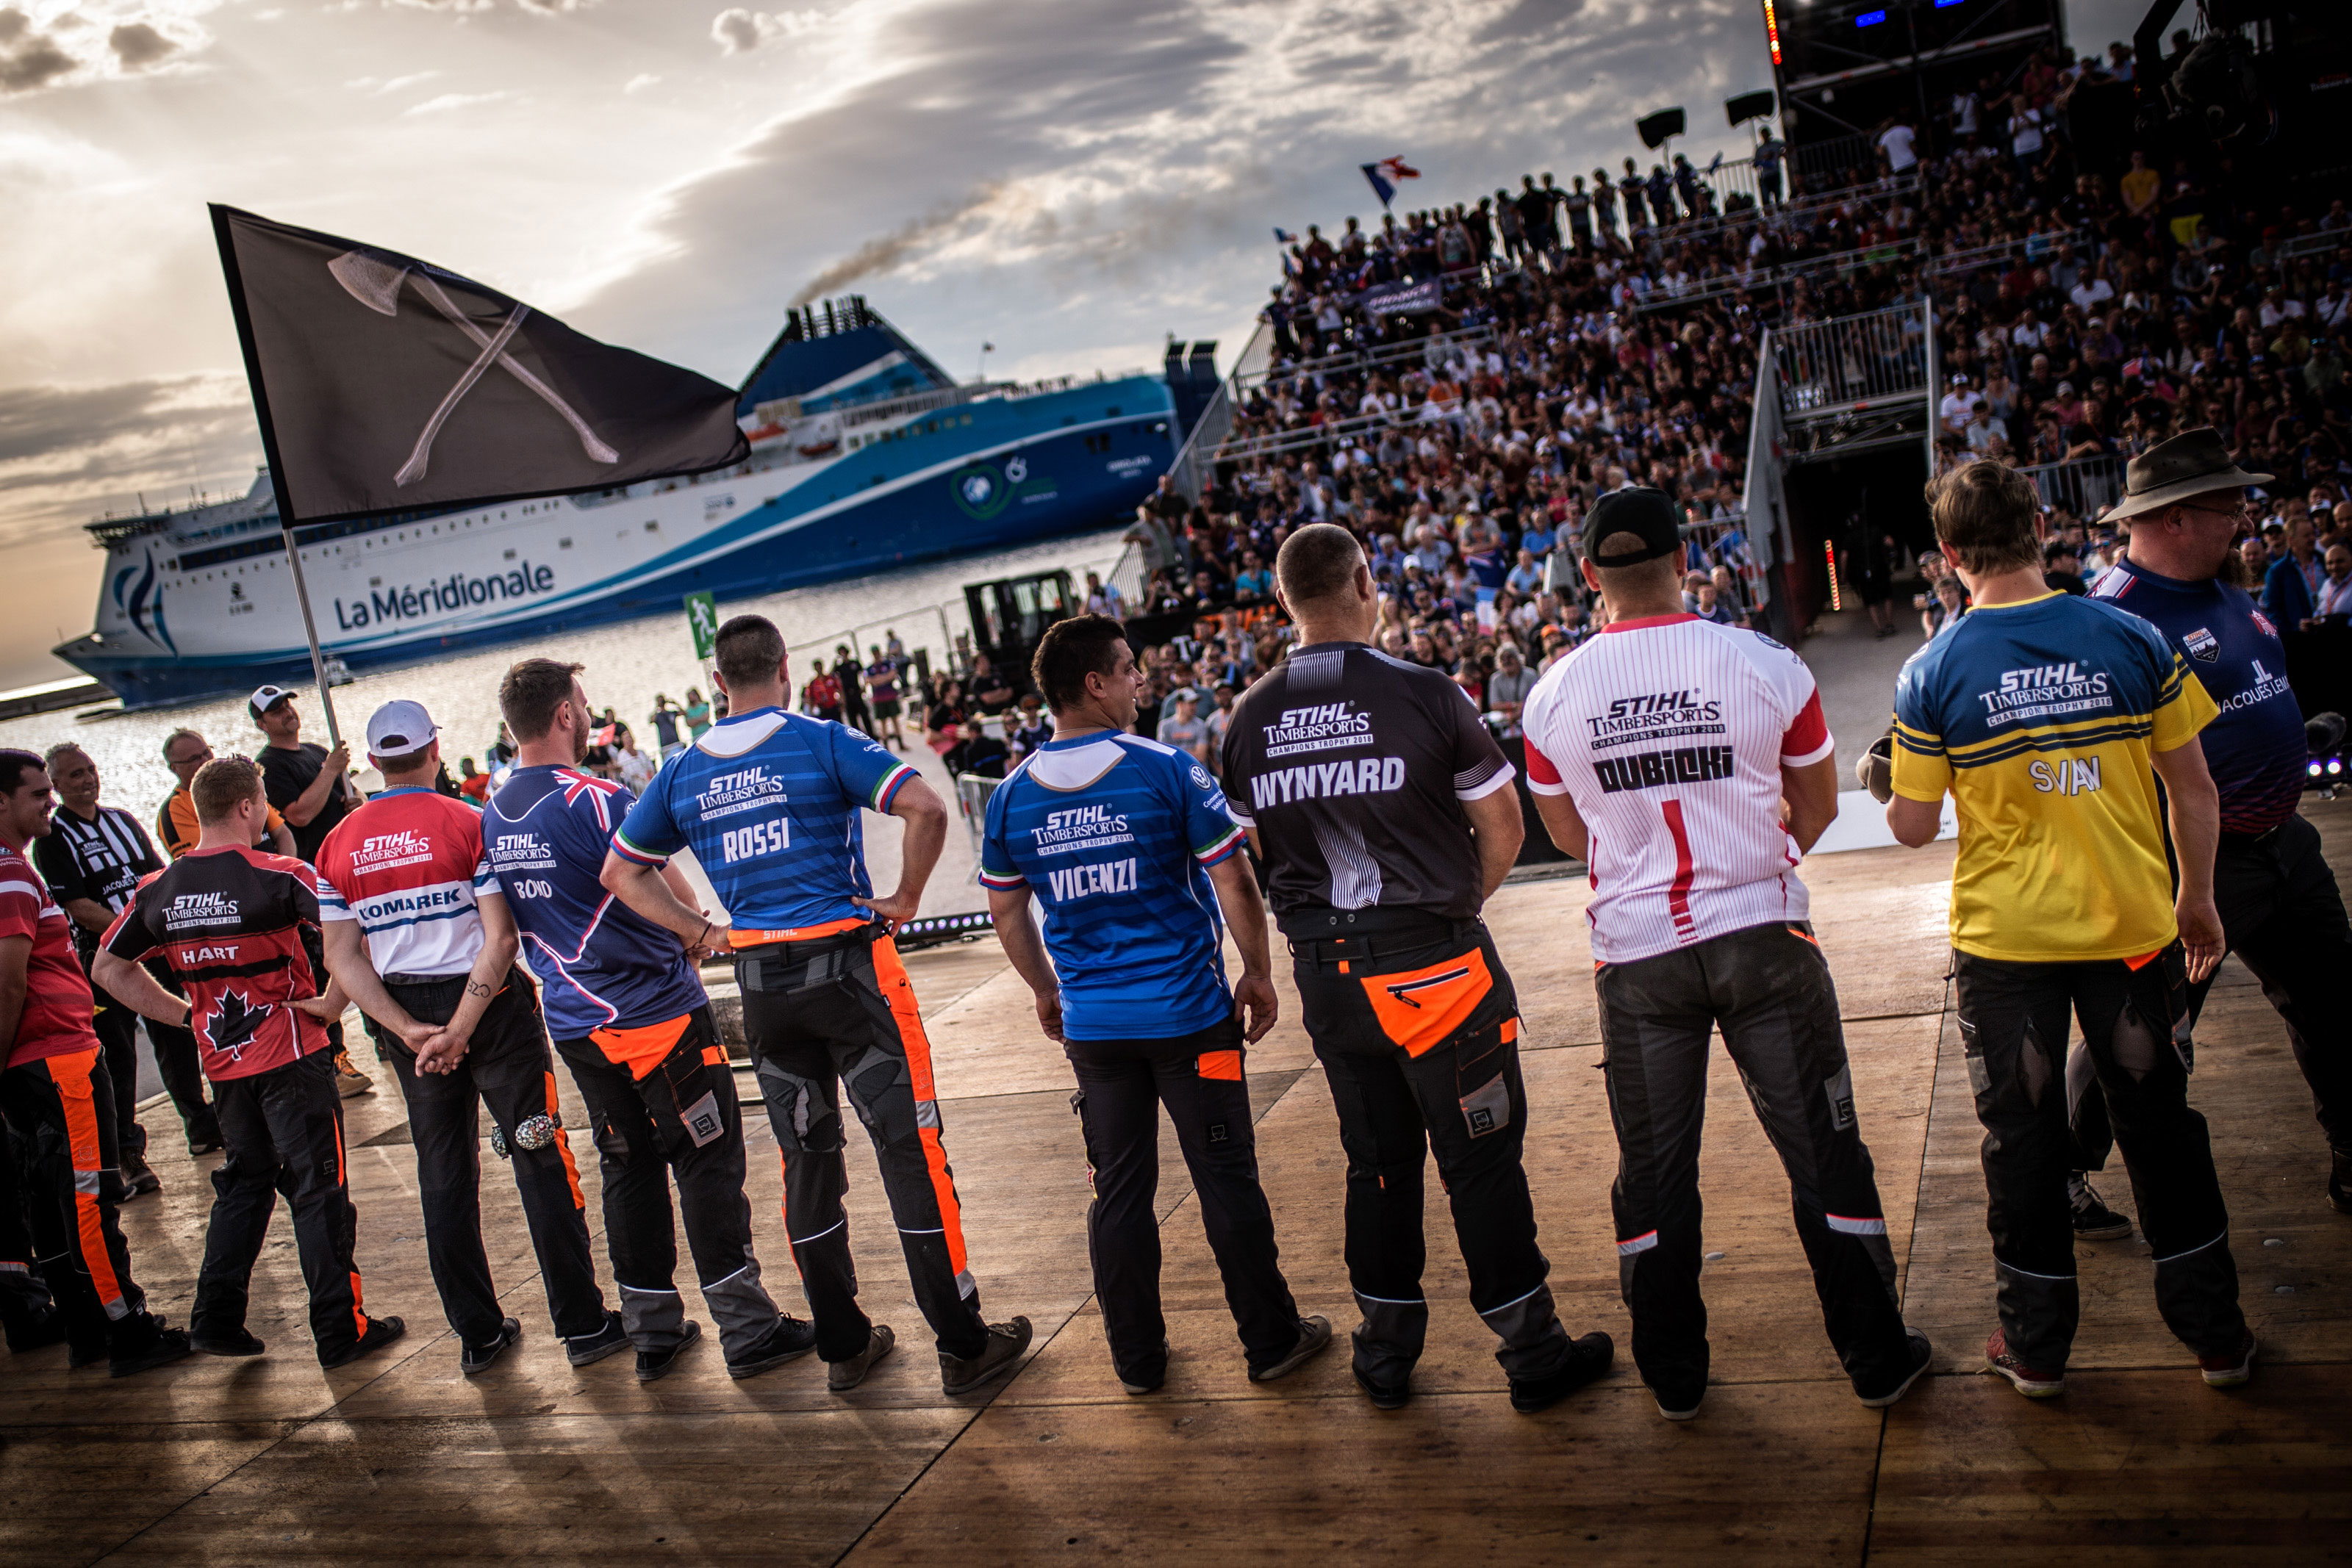 STIHL TIMBERSPORTS® athletes and fans outdoors at the 2018 Champions Trophy in the Old Port of Marseille in France.